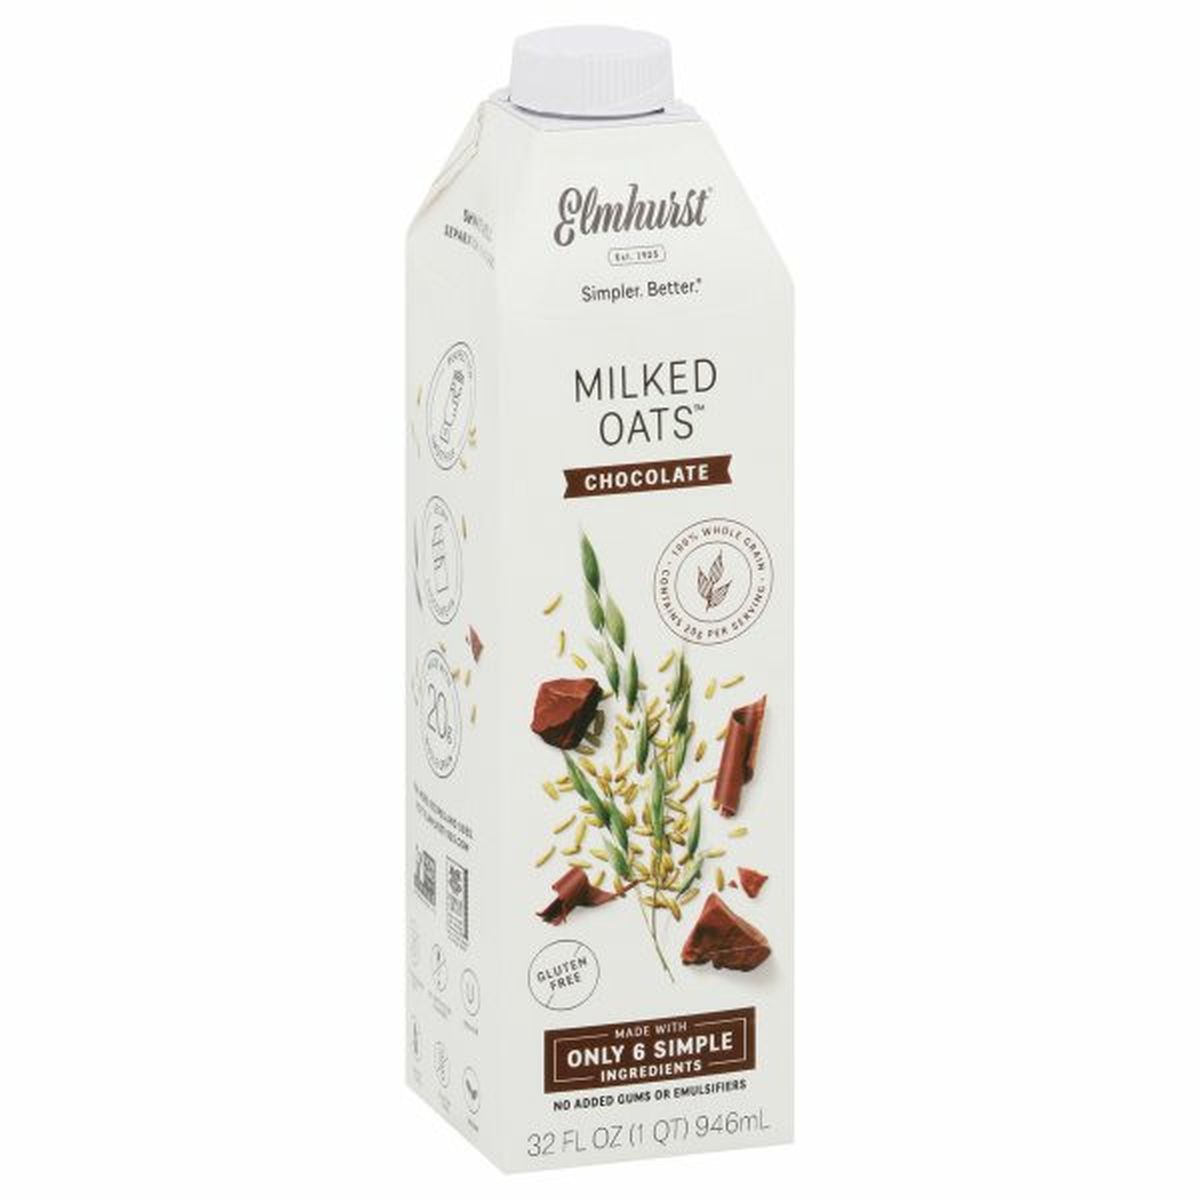 Calories in Elmhurst Milked Oats, Chocolate